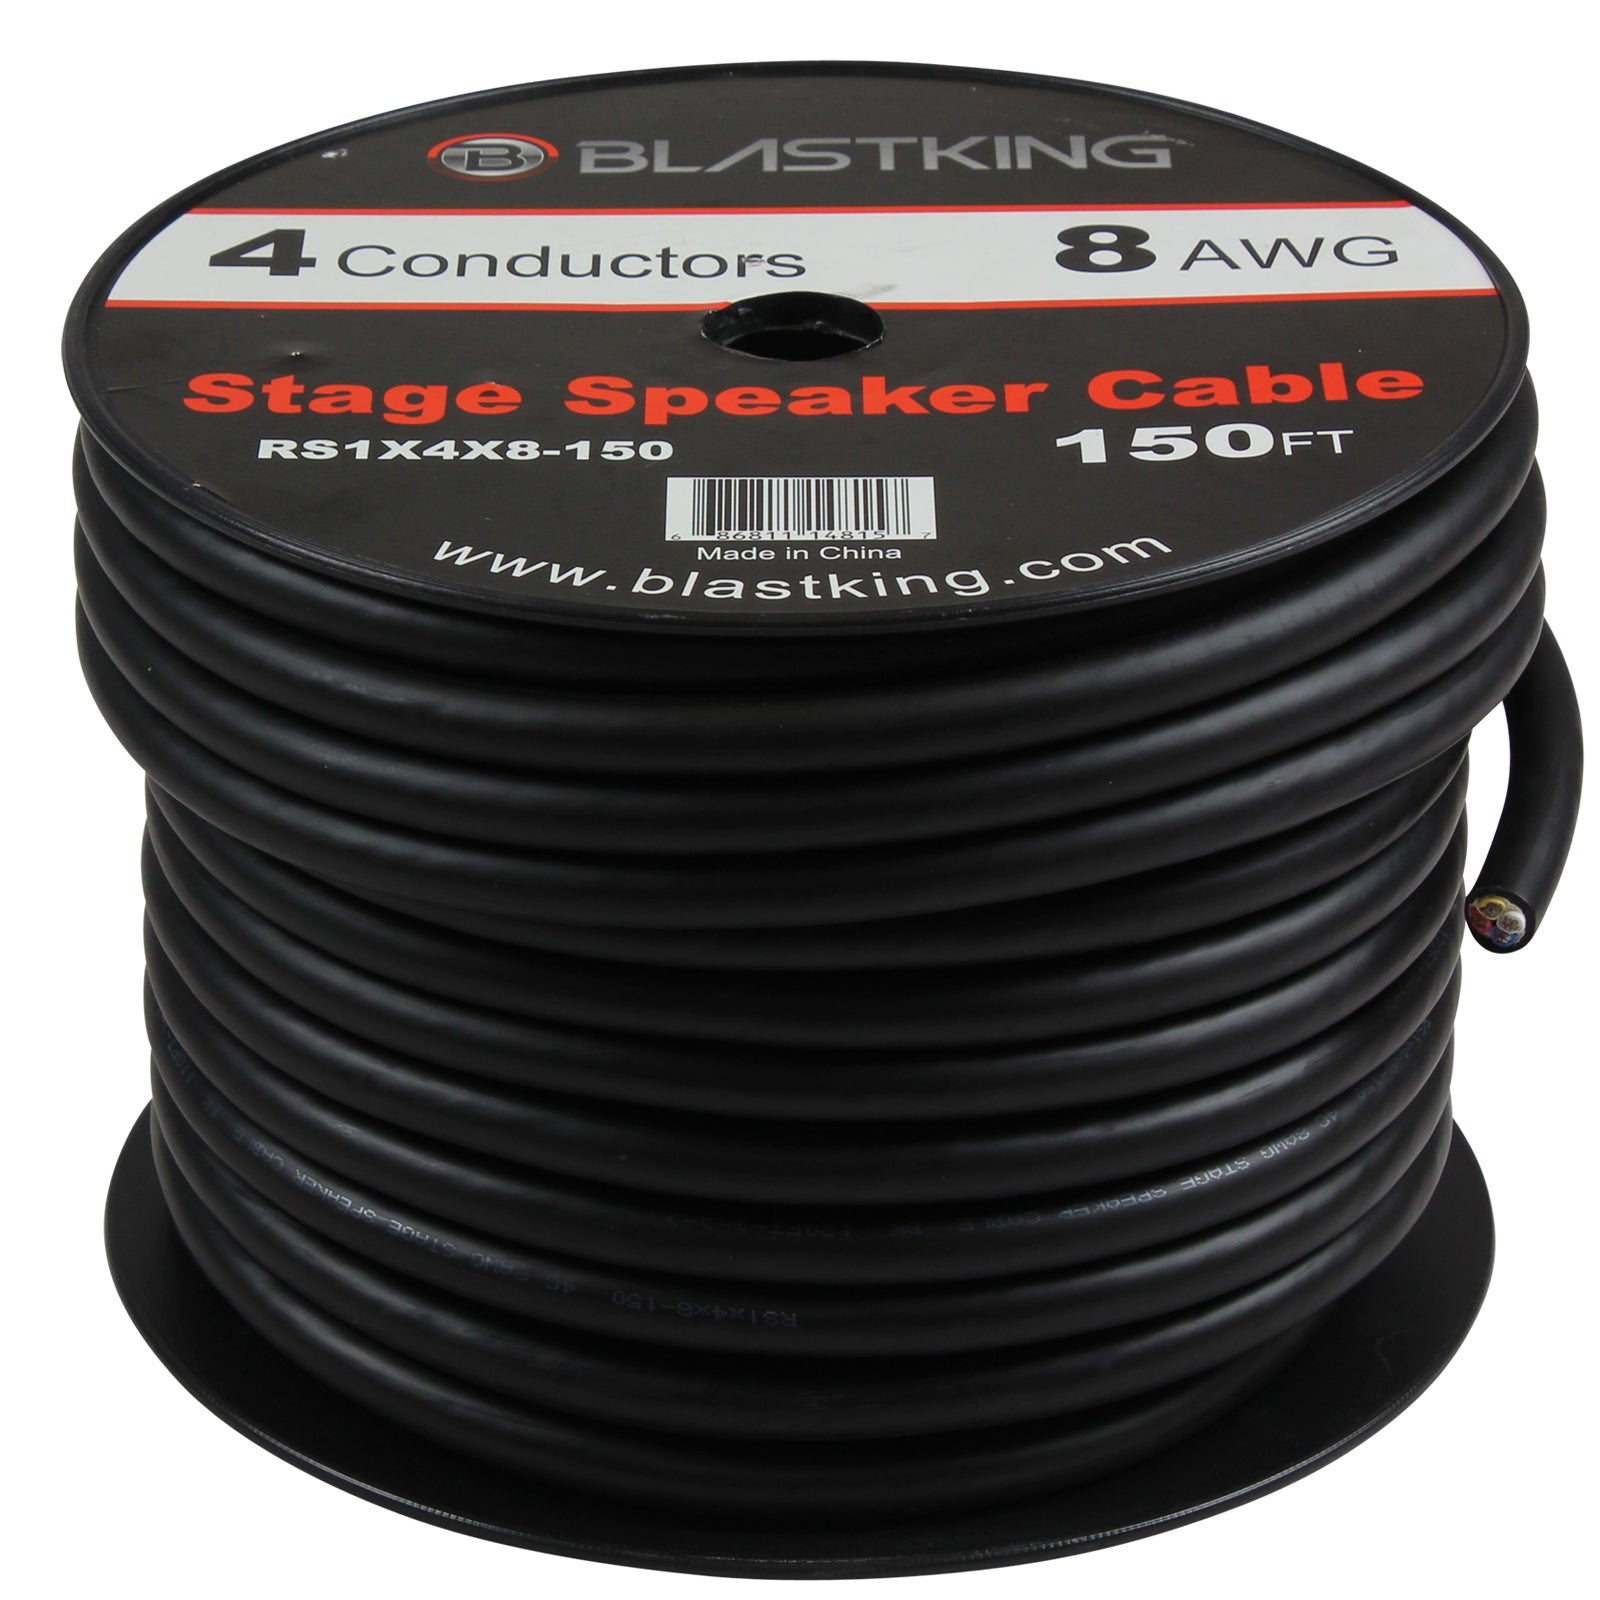 Blastking RS1X4X8-150 8 AWG 4-Conductor Speaker Cable 150 Ft